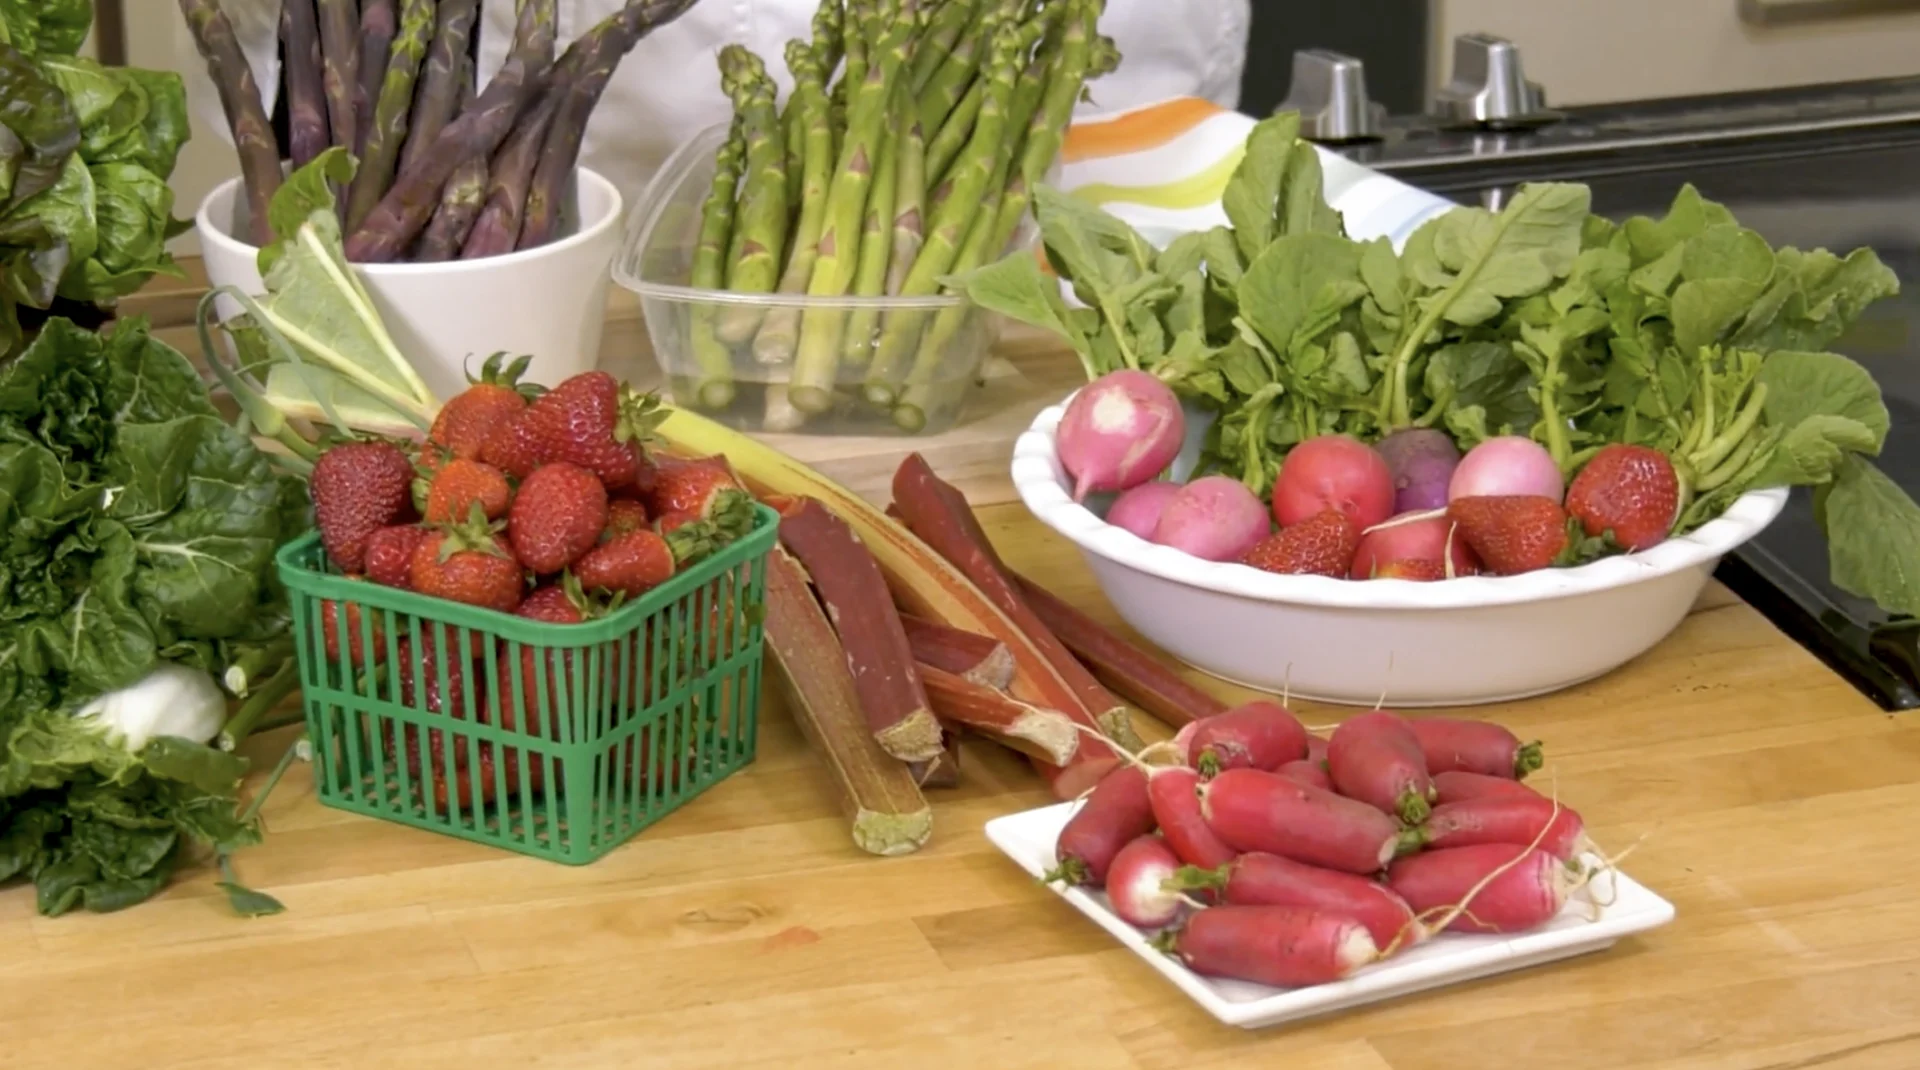 Three key factors to consider before buying fresh produce